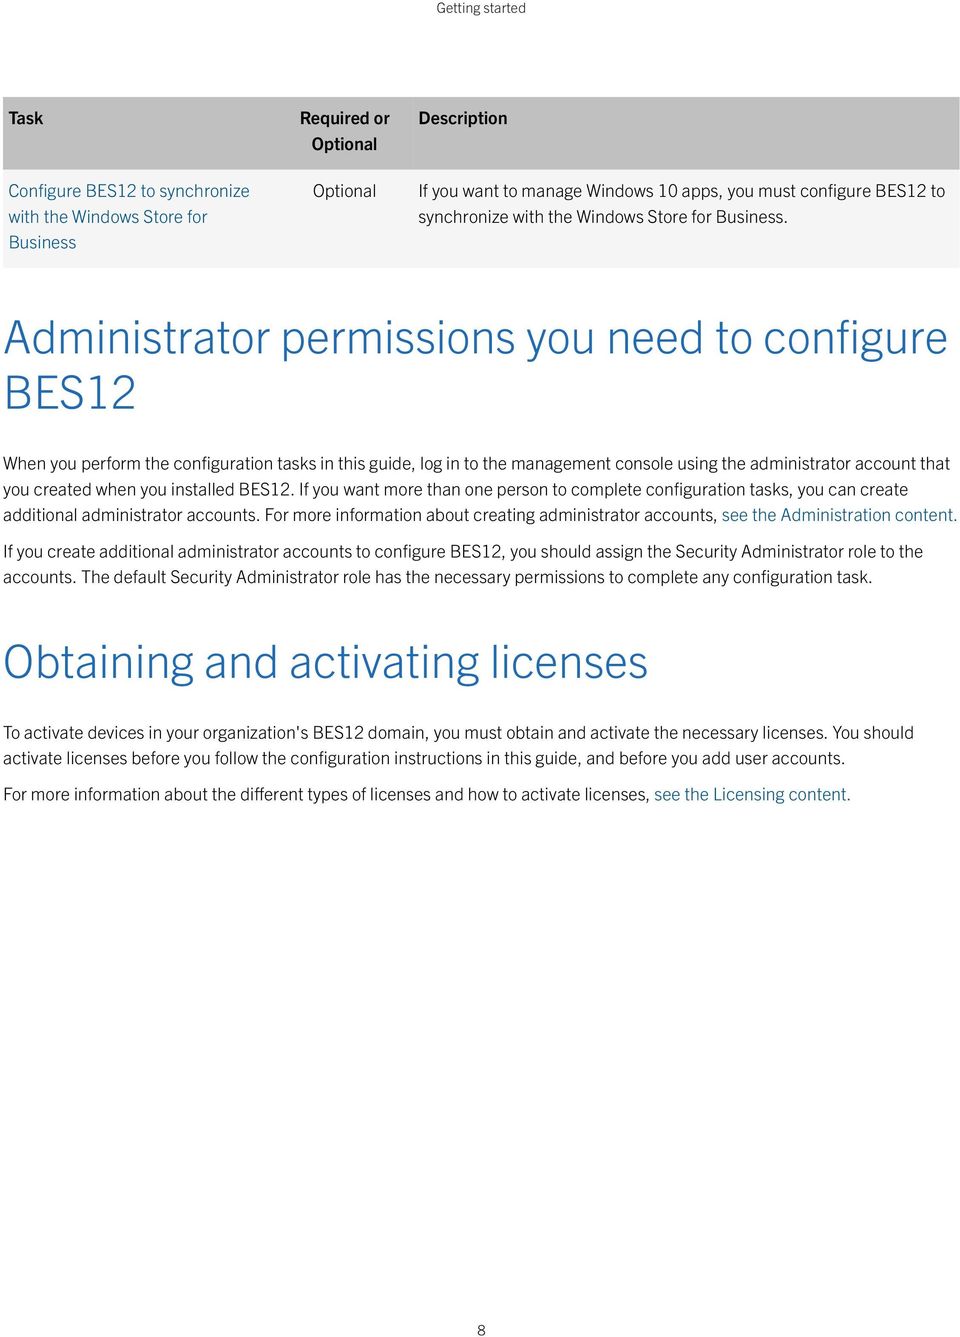 Administrator permissions you need to configure BES12 When you perform the configuration tasks in this guide, log in to the management console using the administrator account that you created when